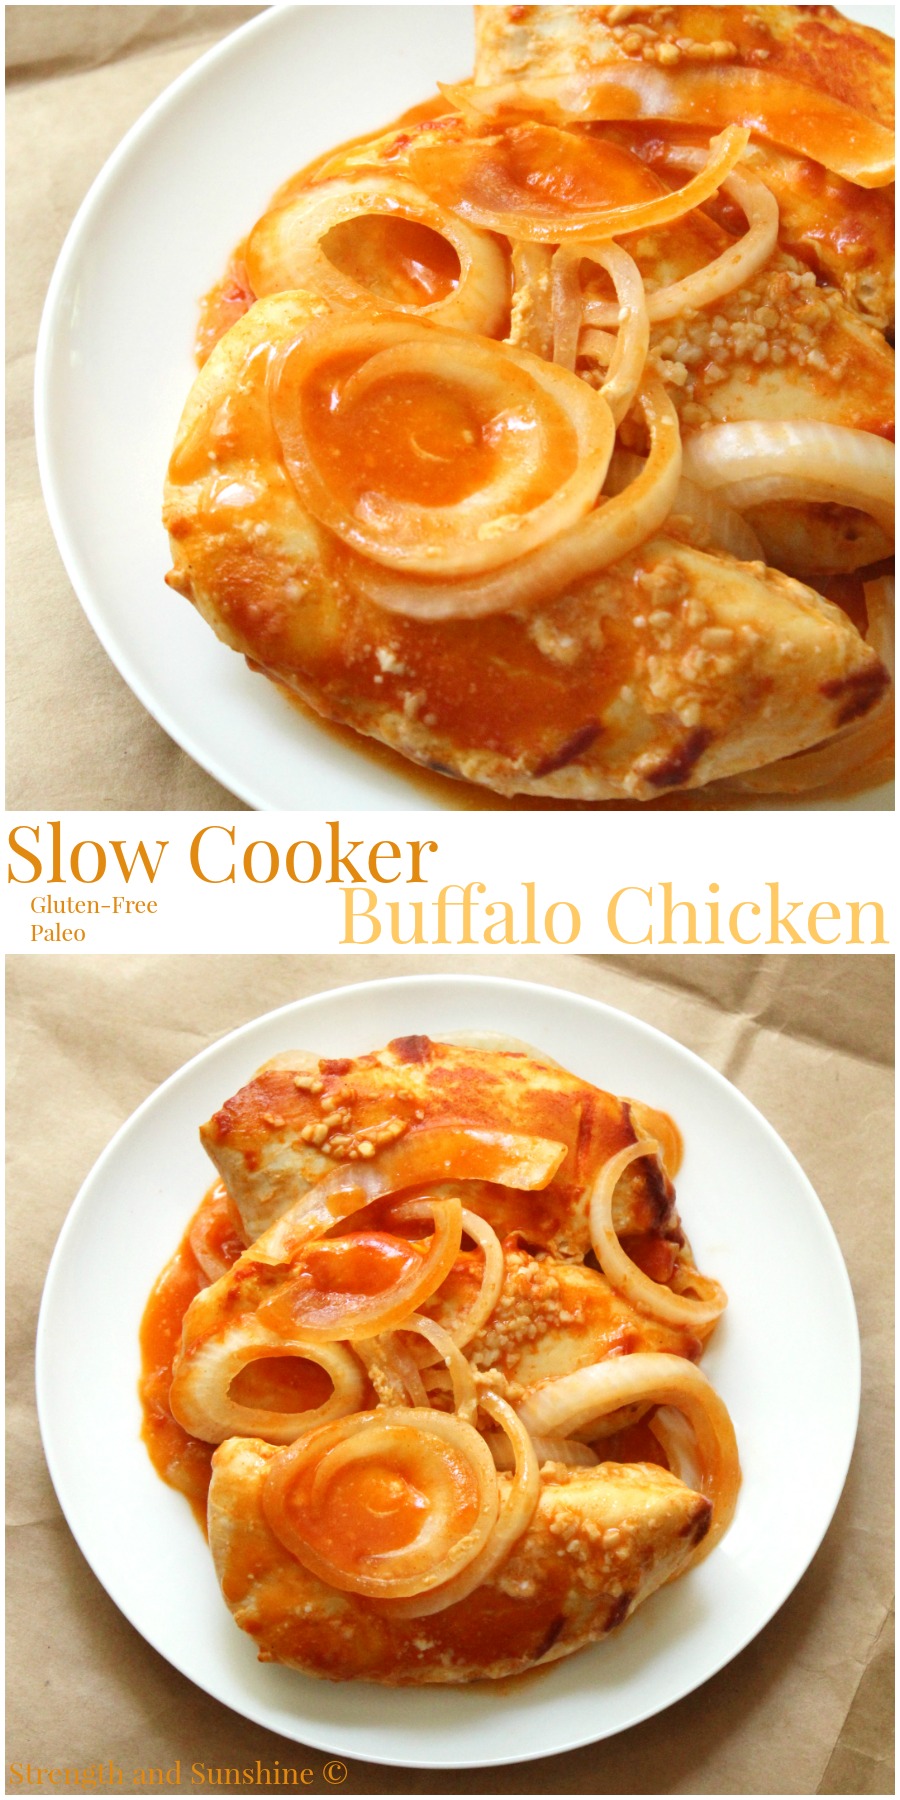 Slow Cooker Buffalo Chicken | Strength and Sunshine @RebeccaGF666 Grab your slow cooker, it's time for a hot and spicy meal! Thrown together in seconds, but full of flavor, gluten-free, dairy-free, paleo, and with a secret to the creaminess; slow cooker buffalo chicken is the perfect weeknight dinner recipe!